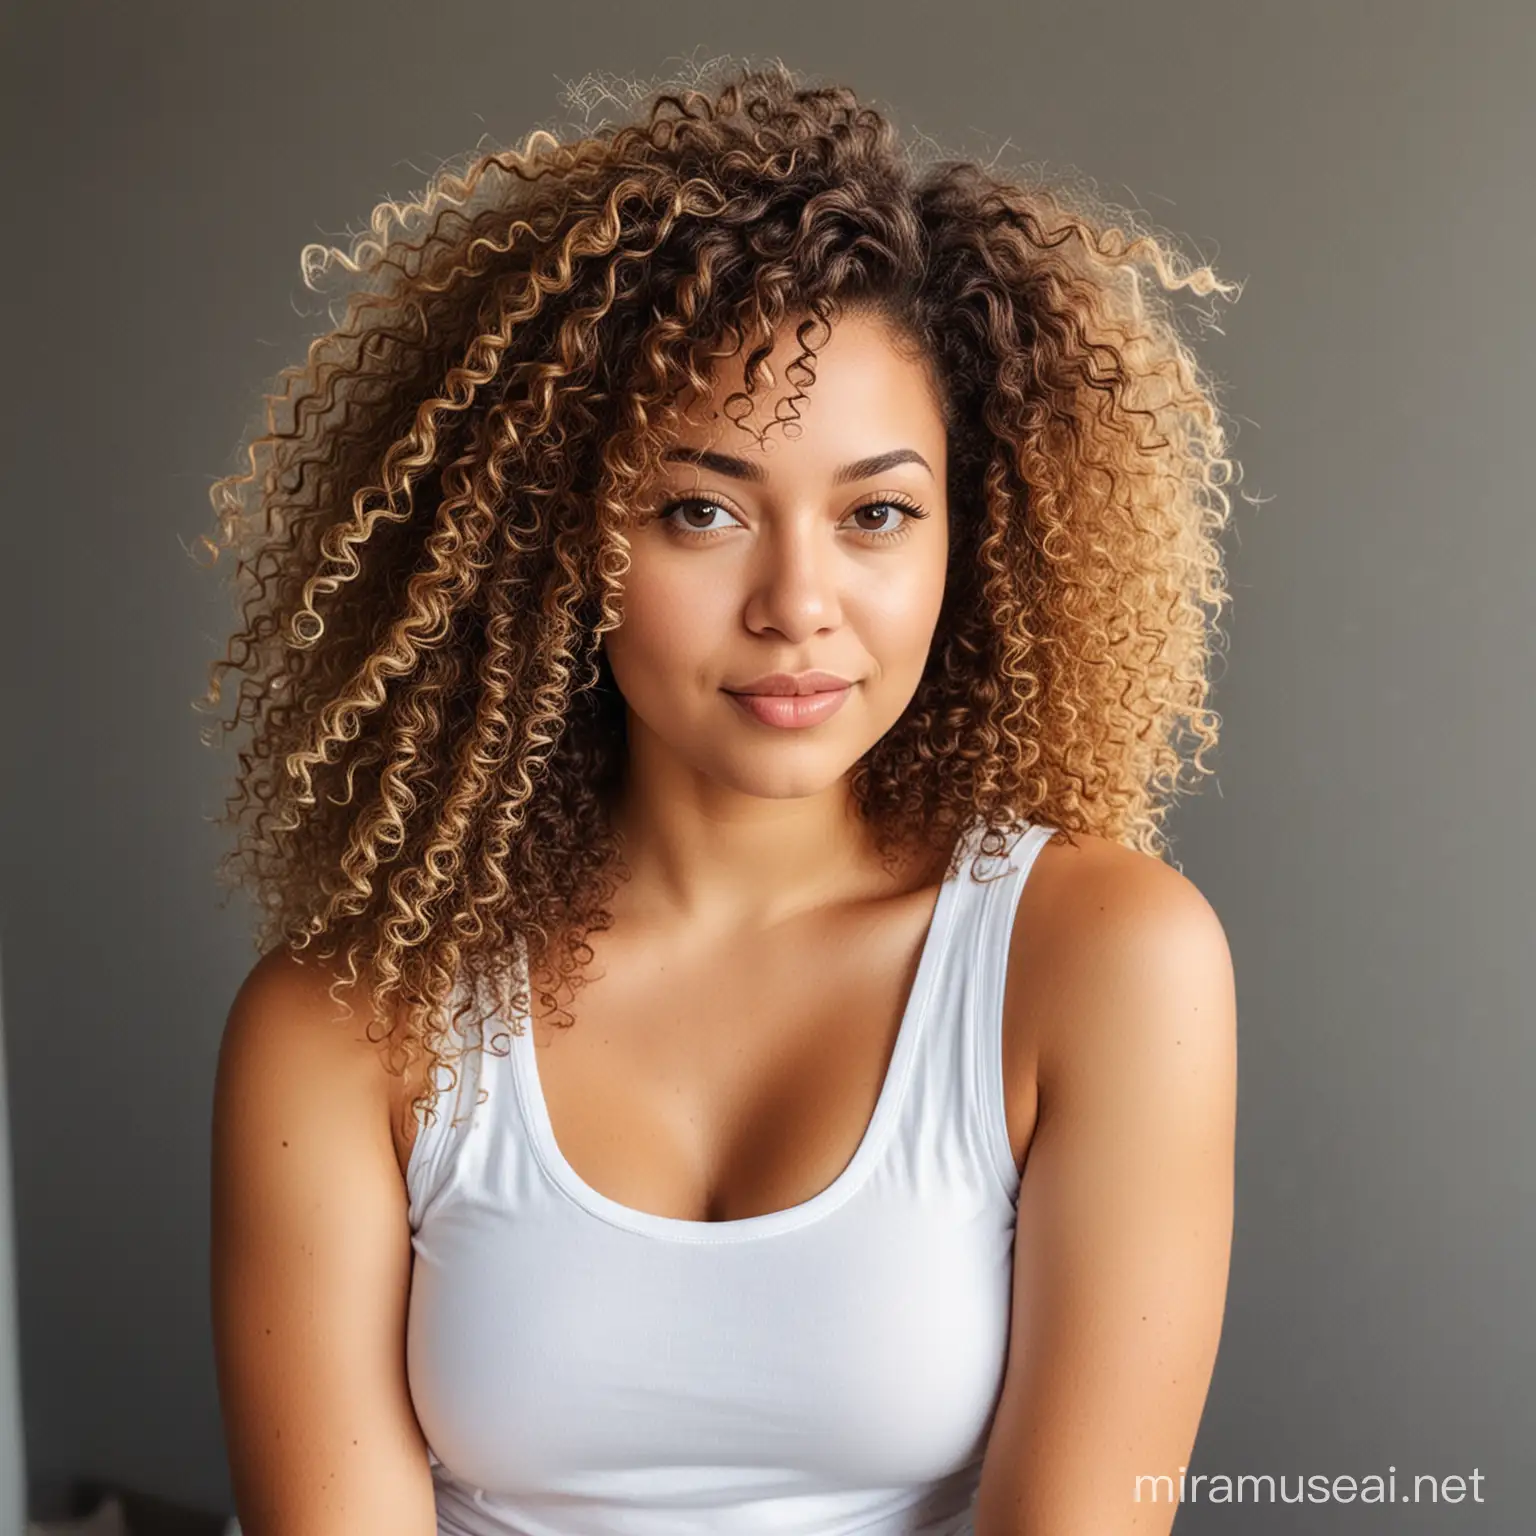 A woman  curvy Curly hair with white tank top